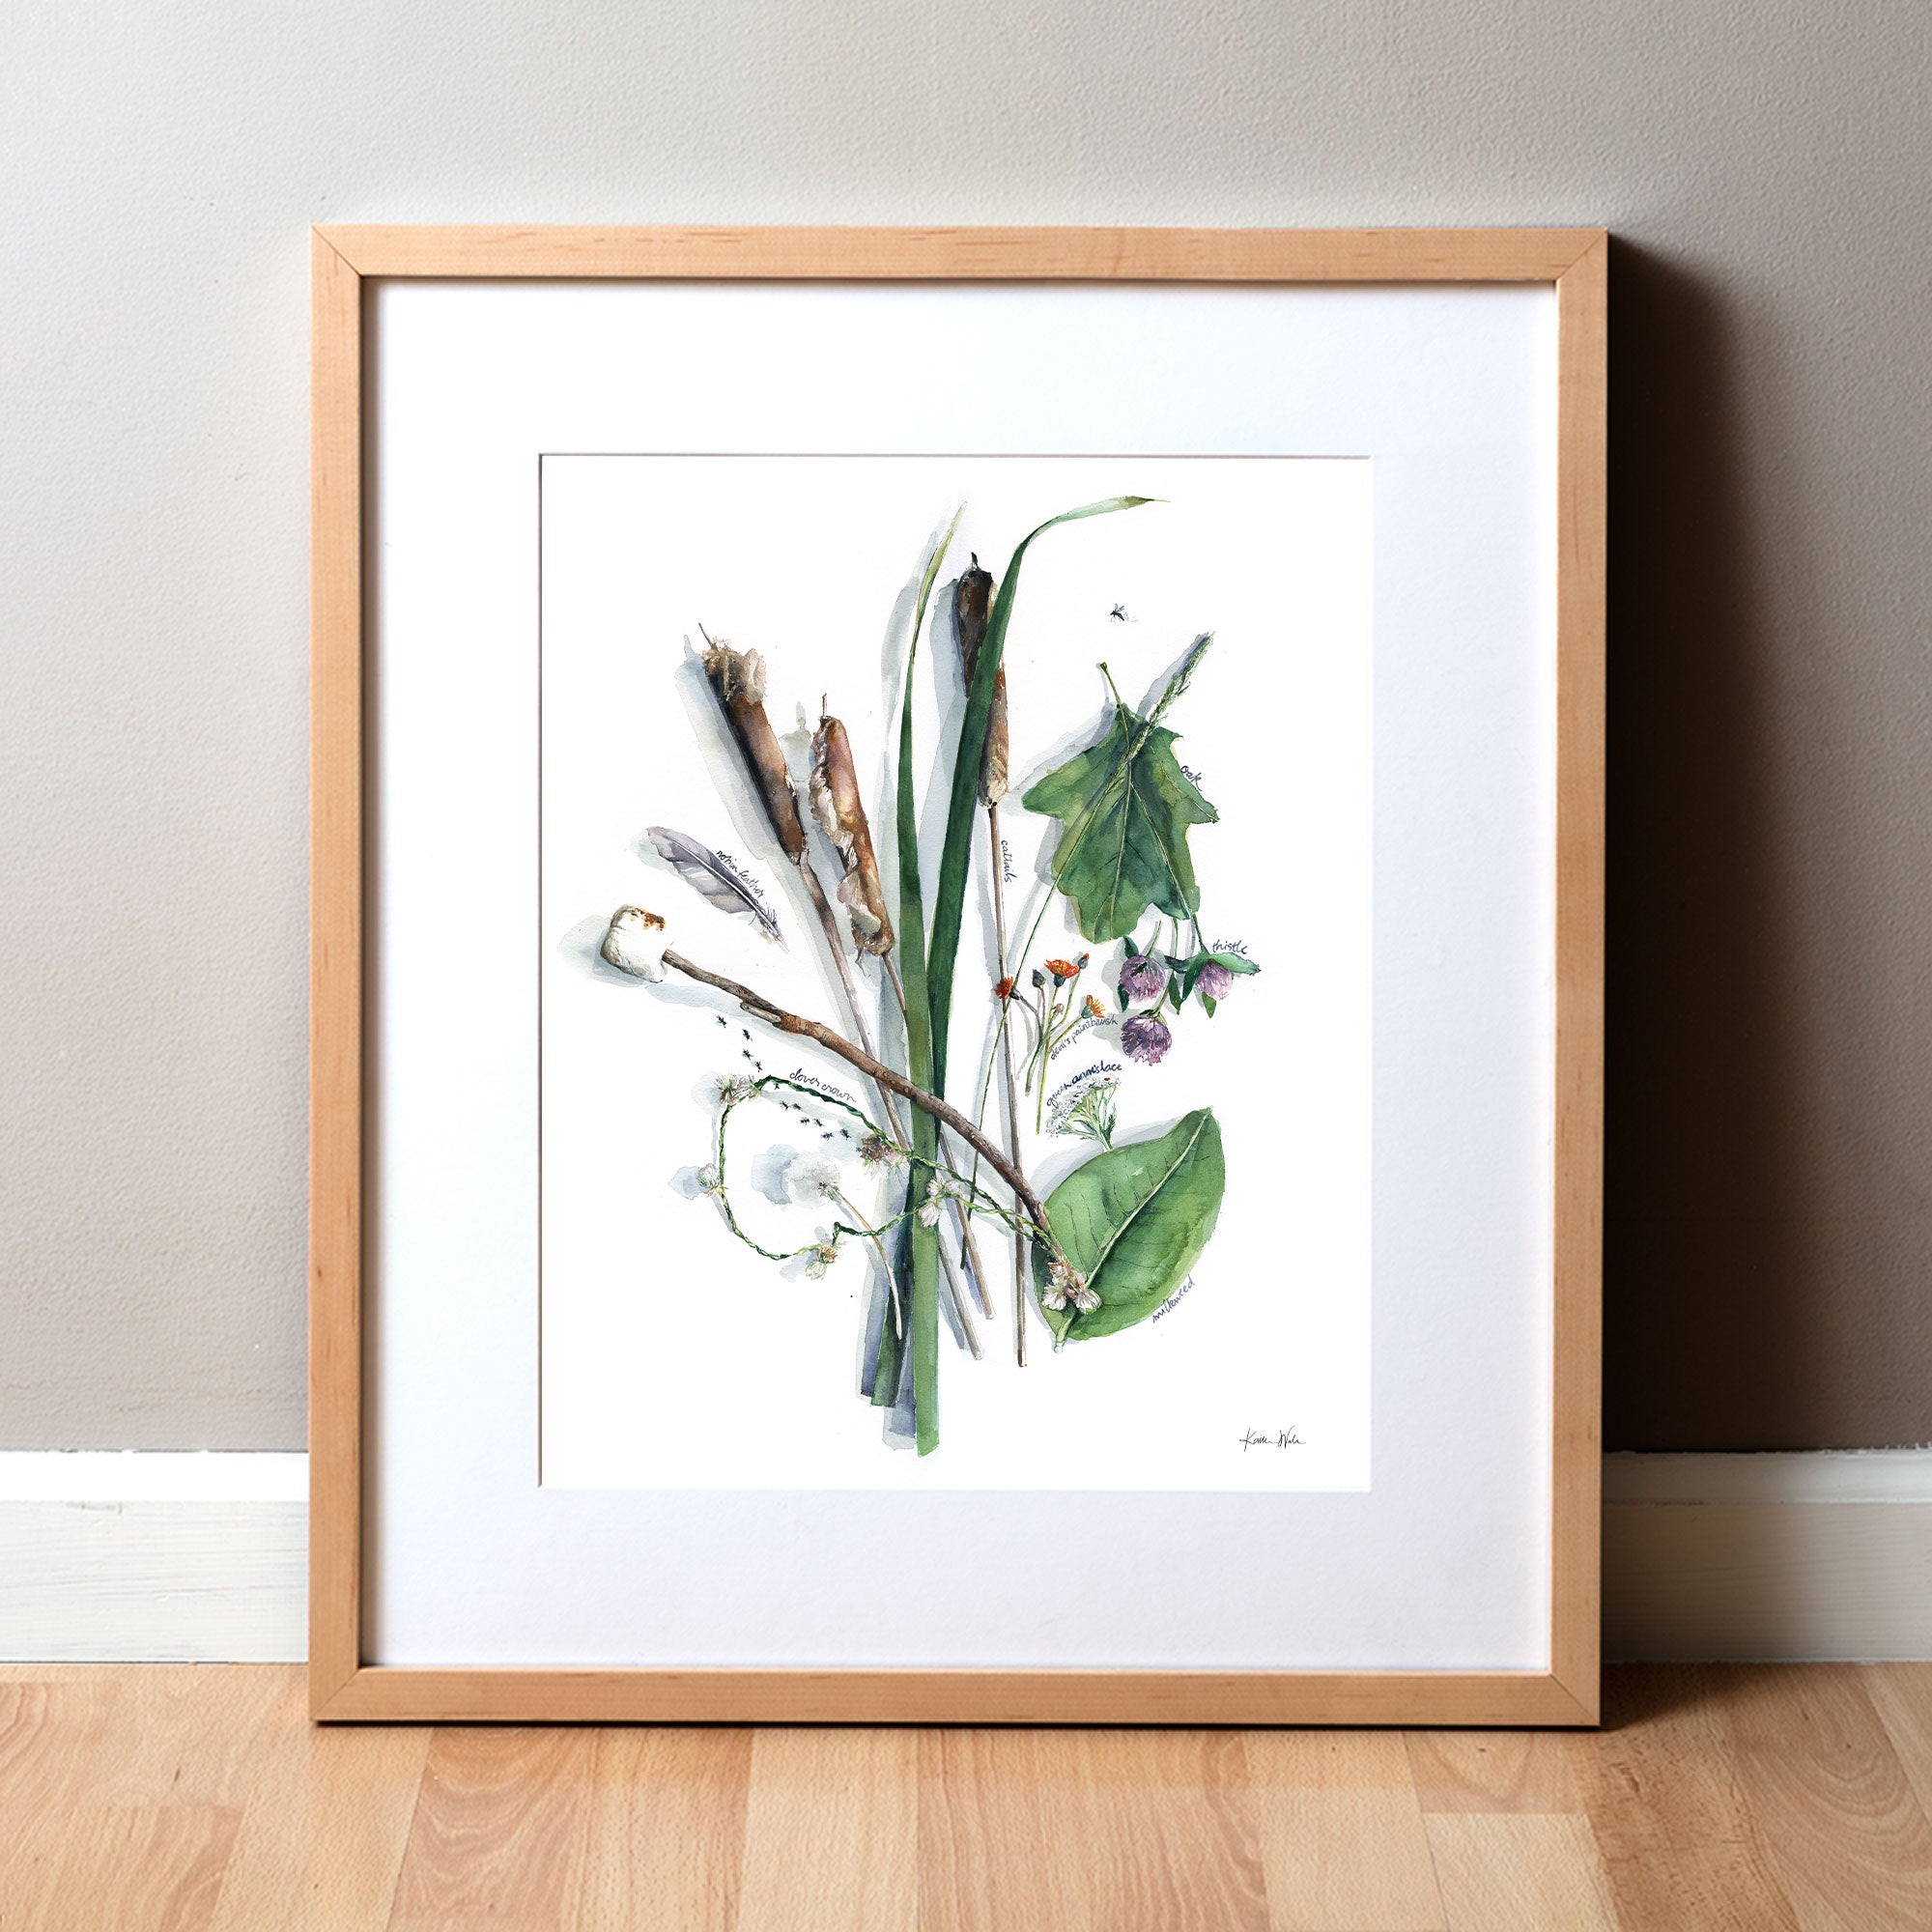 Framed watercolor painting of a collection of summer foraged items.